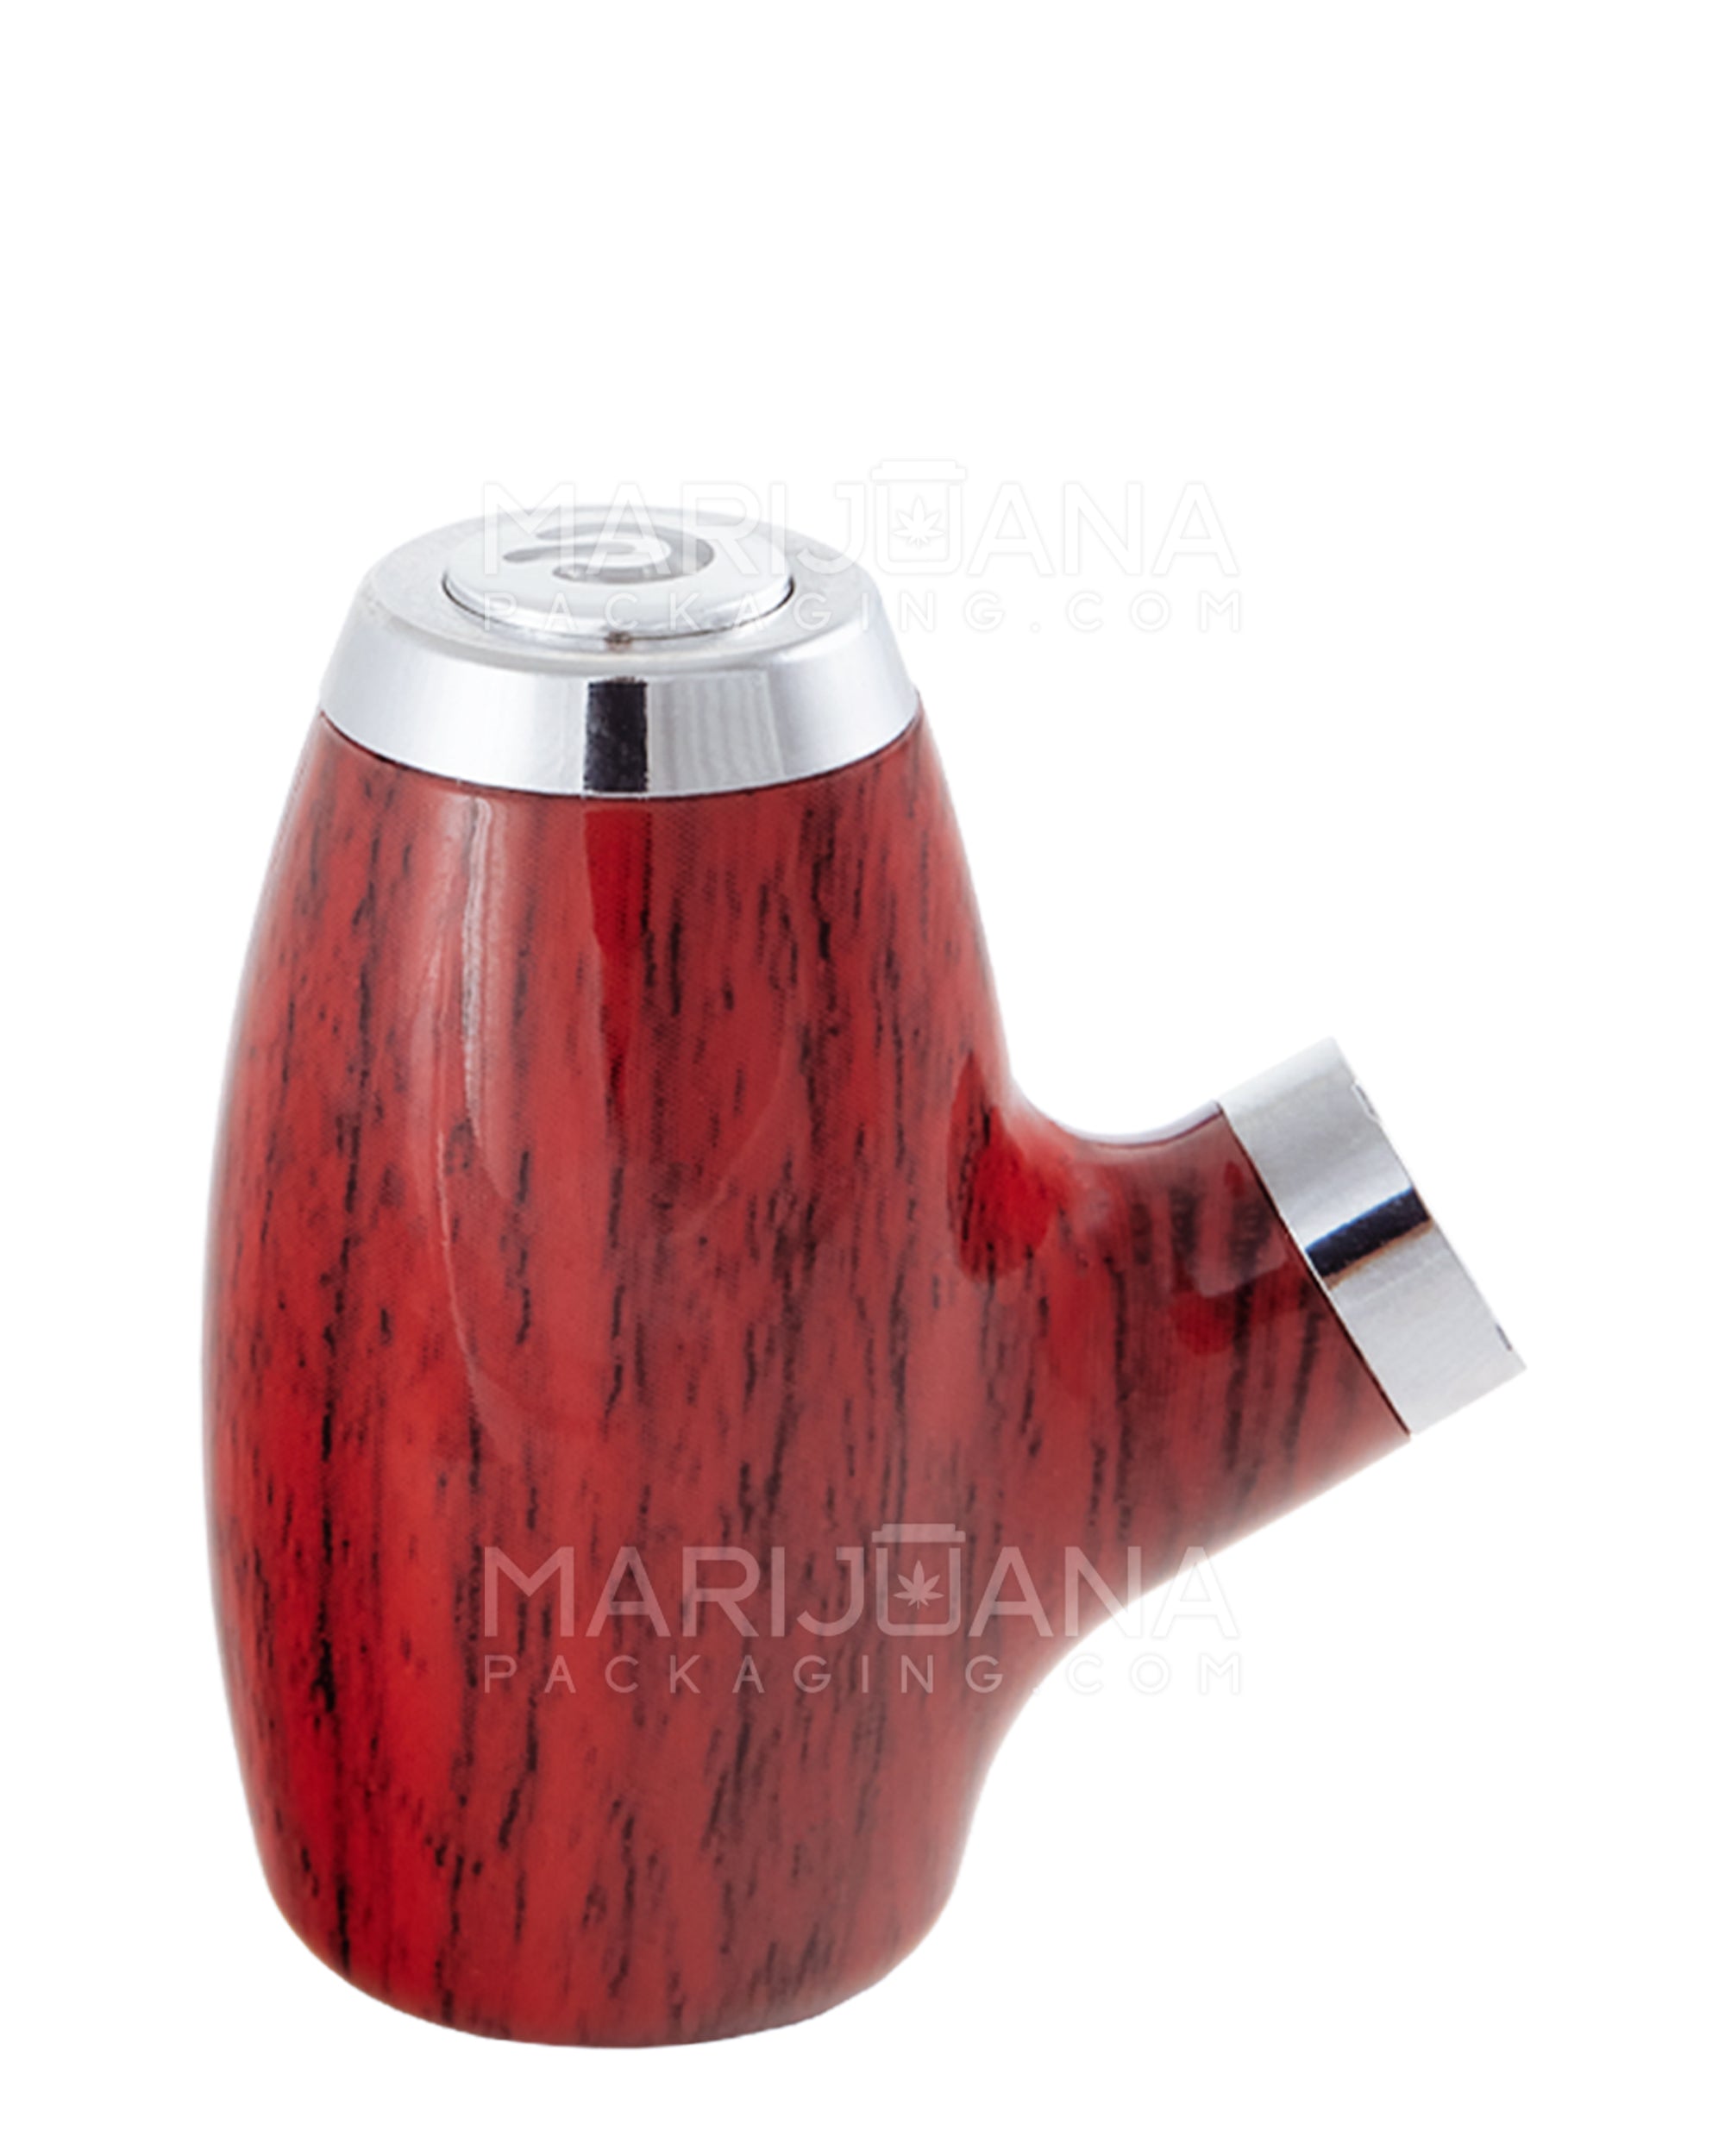 Variable Voltage "Old Man's Pipe" Shaped Vape Cartridge Battery | 900mah - Redwood Wood - 510 Thread - 1